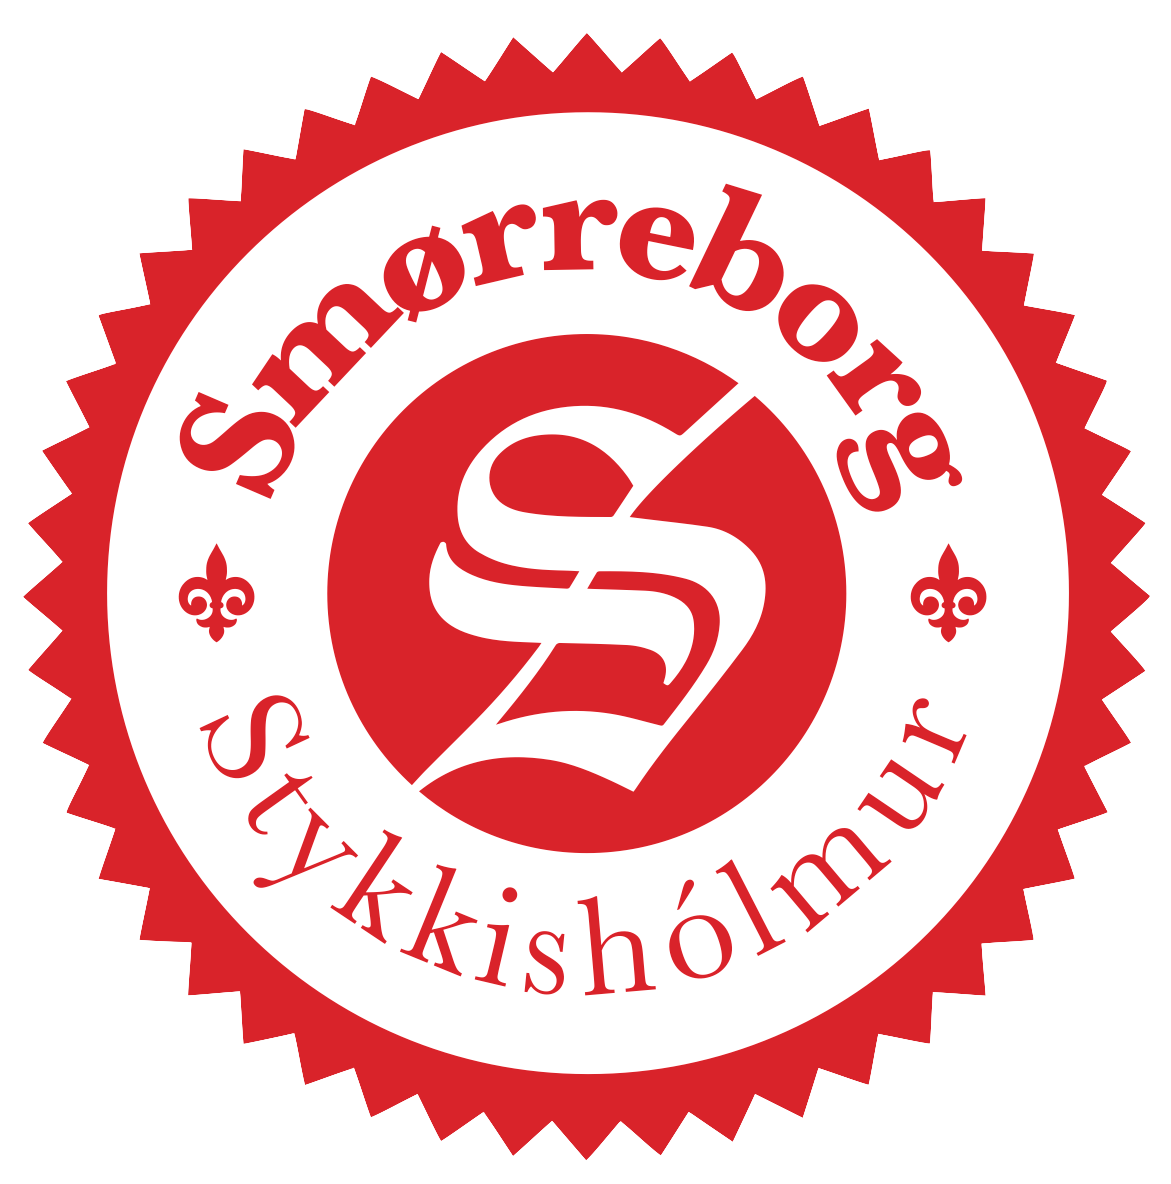 A red and white logo that says ' smorreborg ' on it